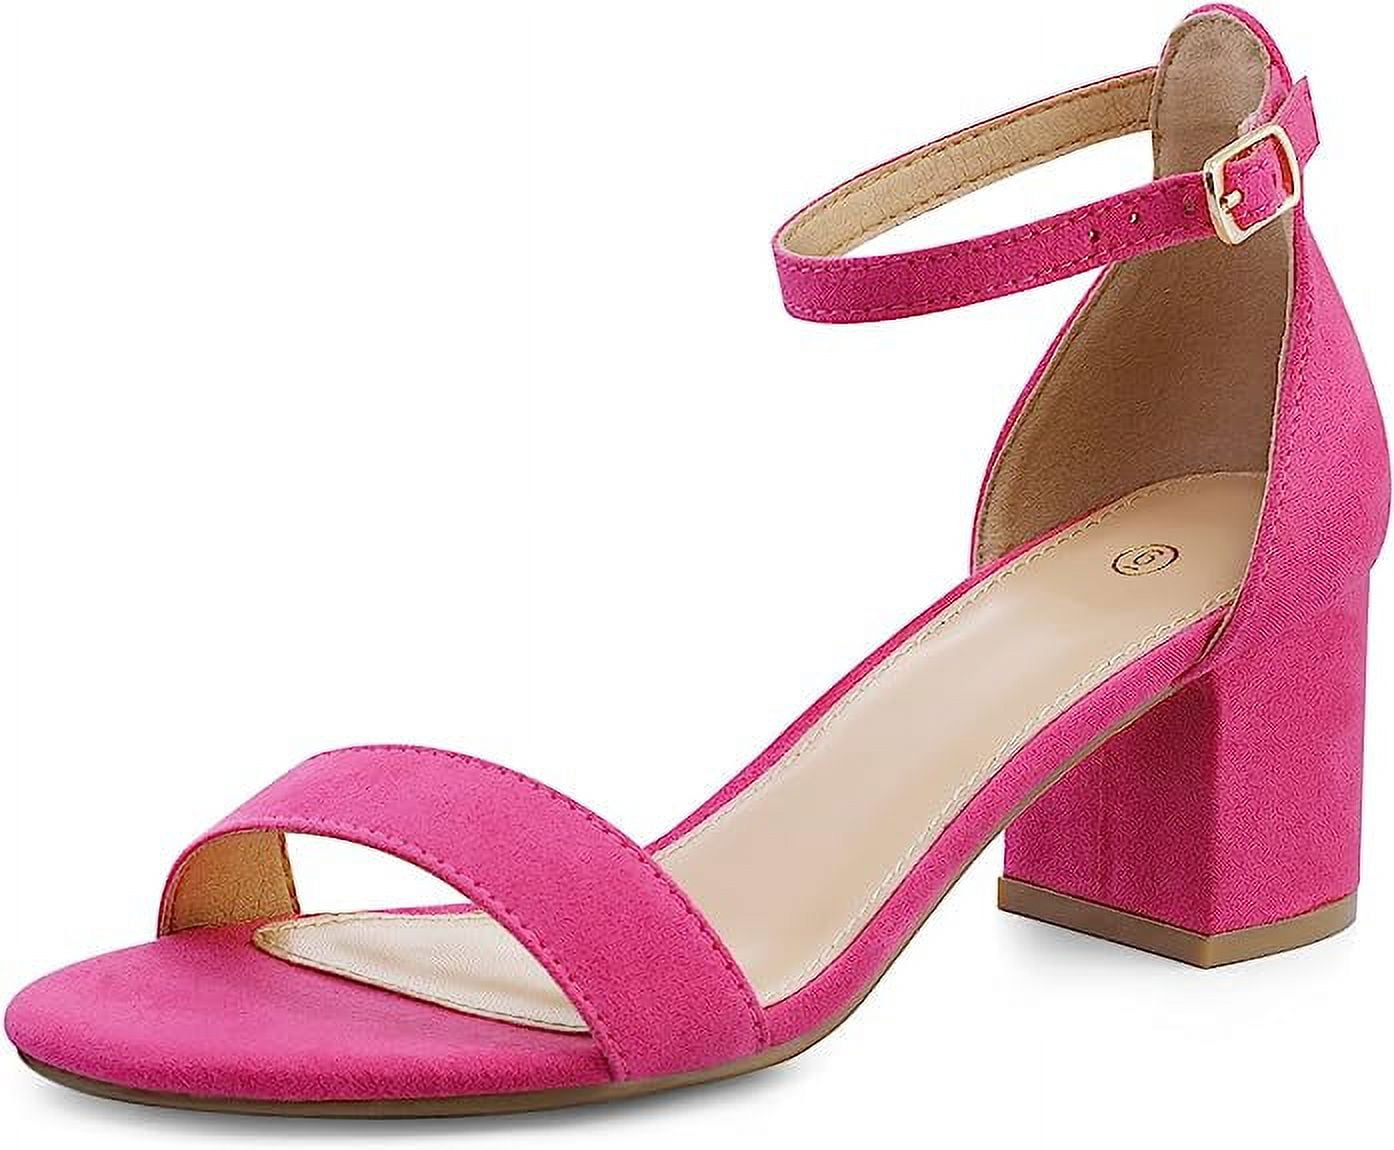 Oh Please Pink Strappy Heeled Sandals With Diamante Chains – Club L London  - USA